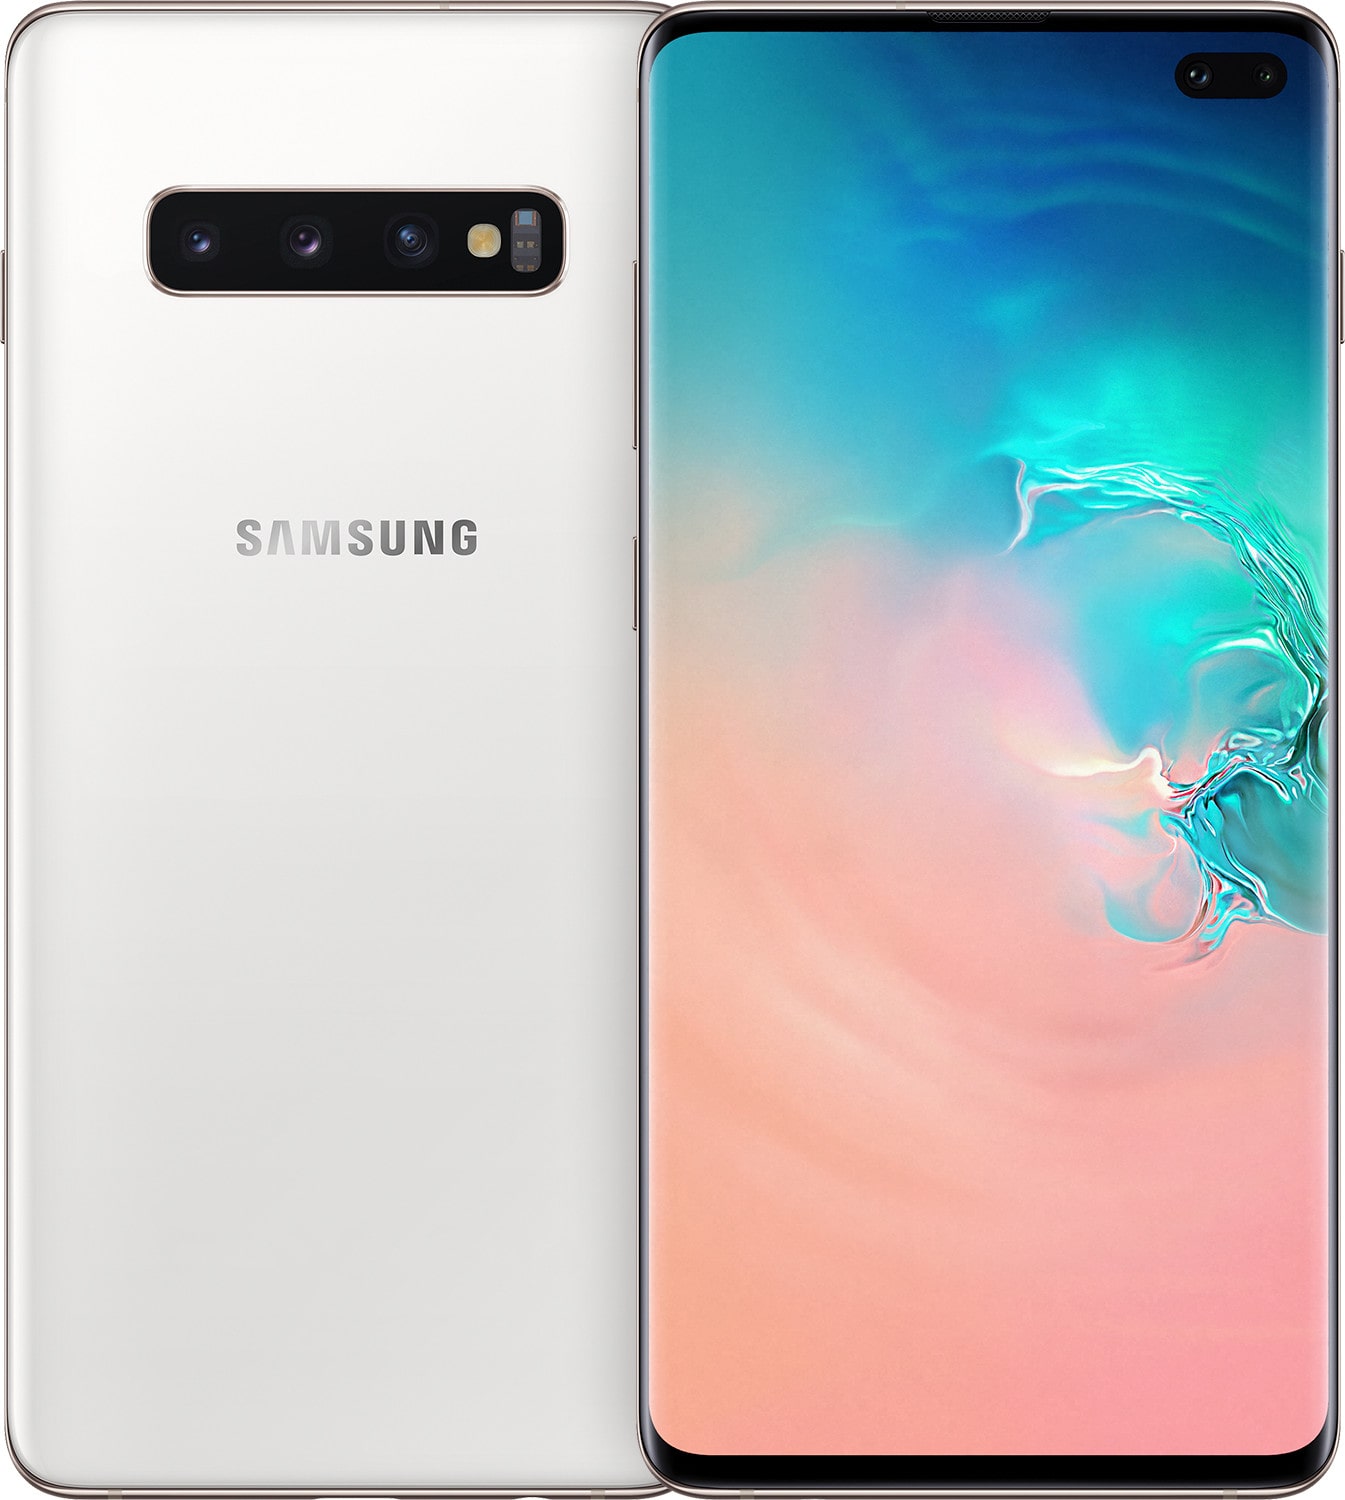 Samsung Galaxy S10 Plus Price in Pakistan, Specs & New Features